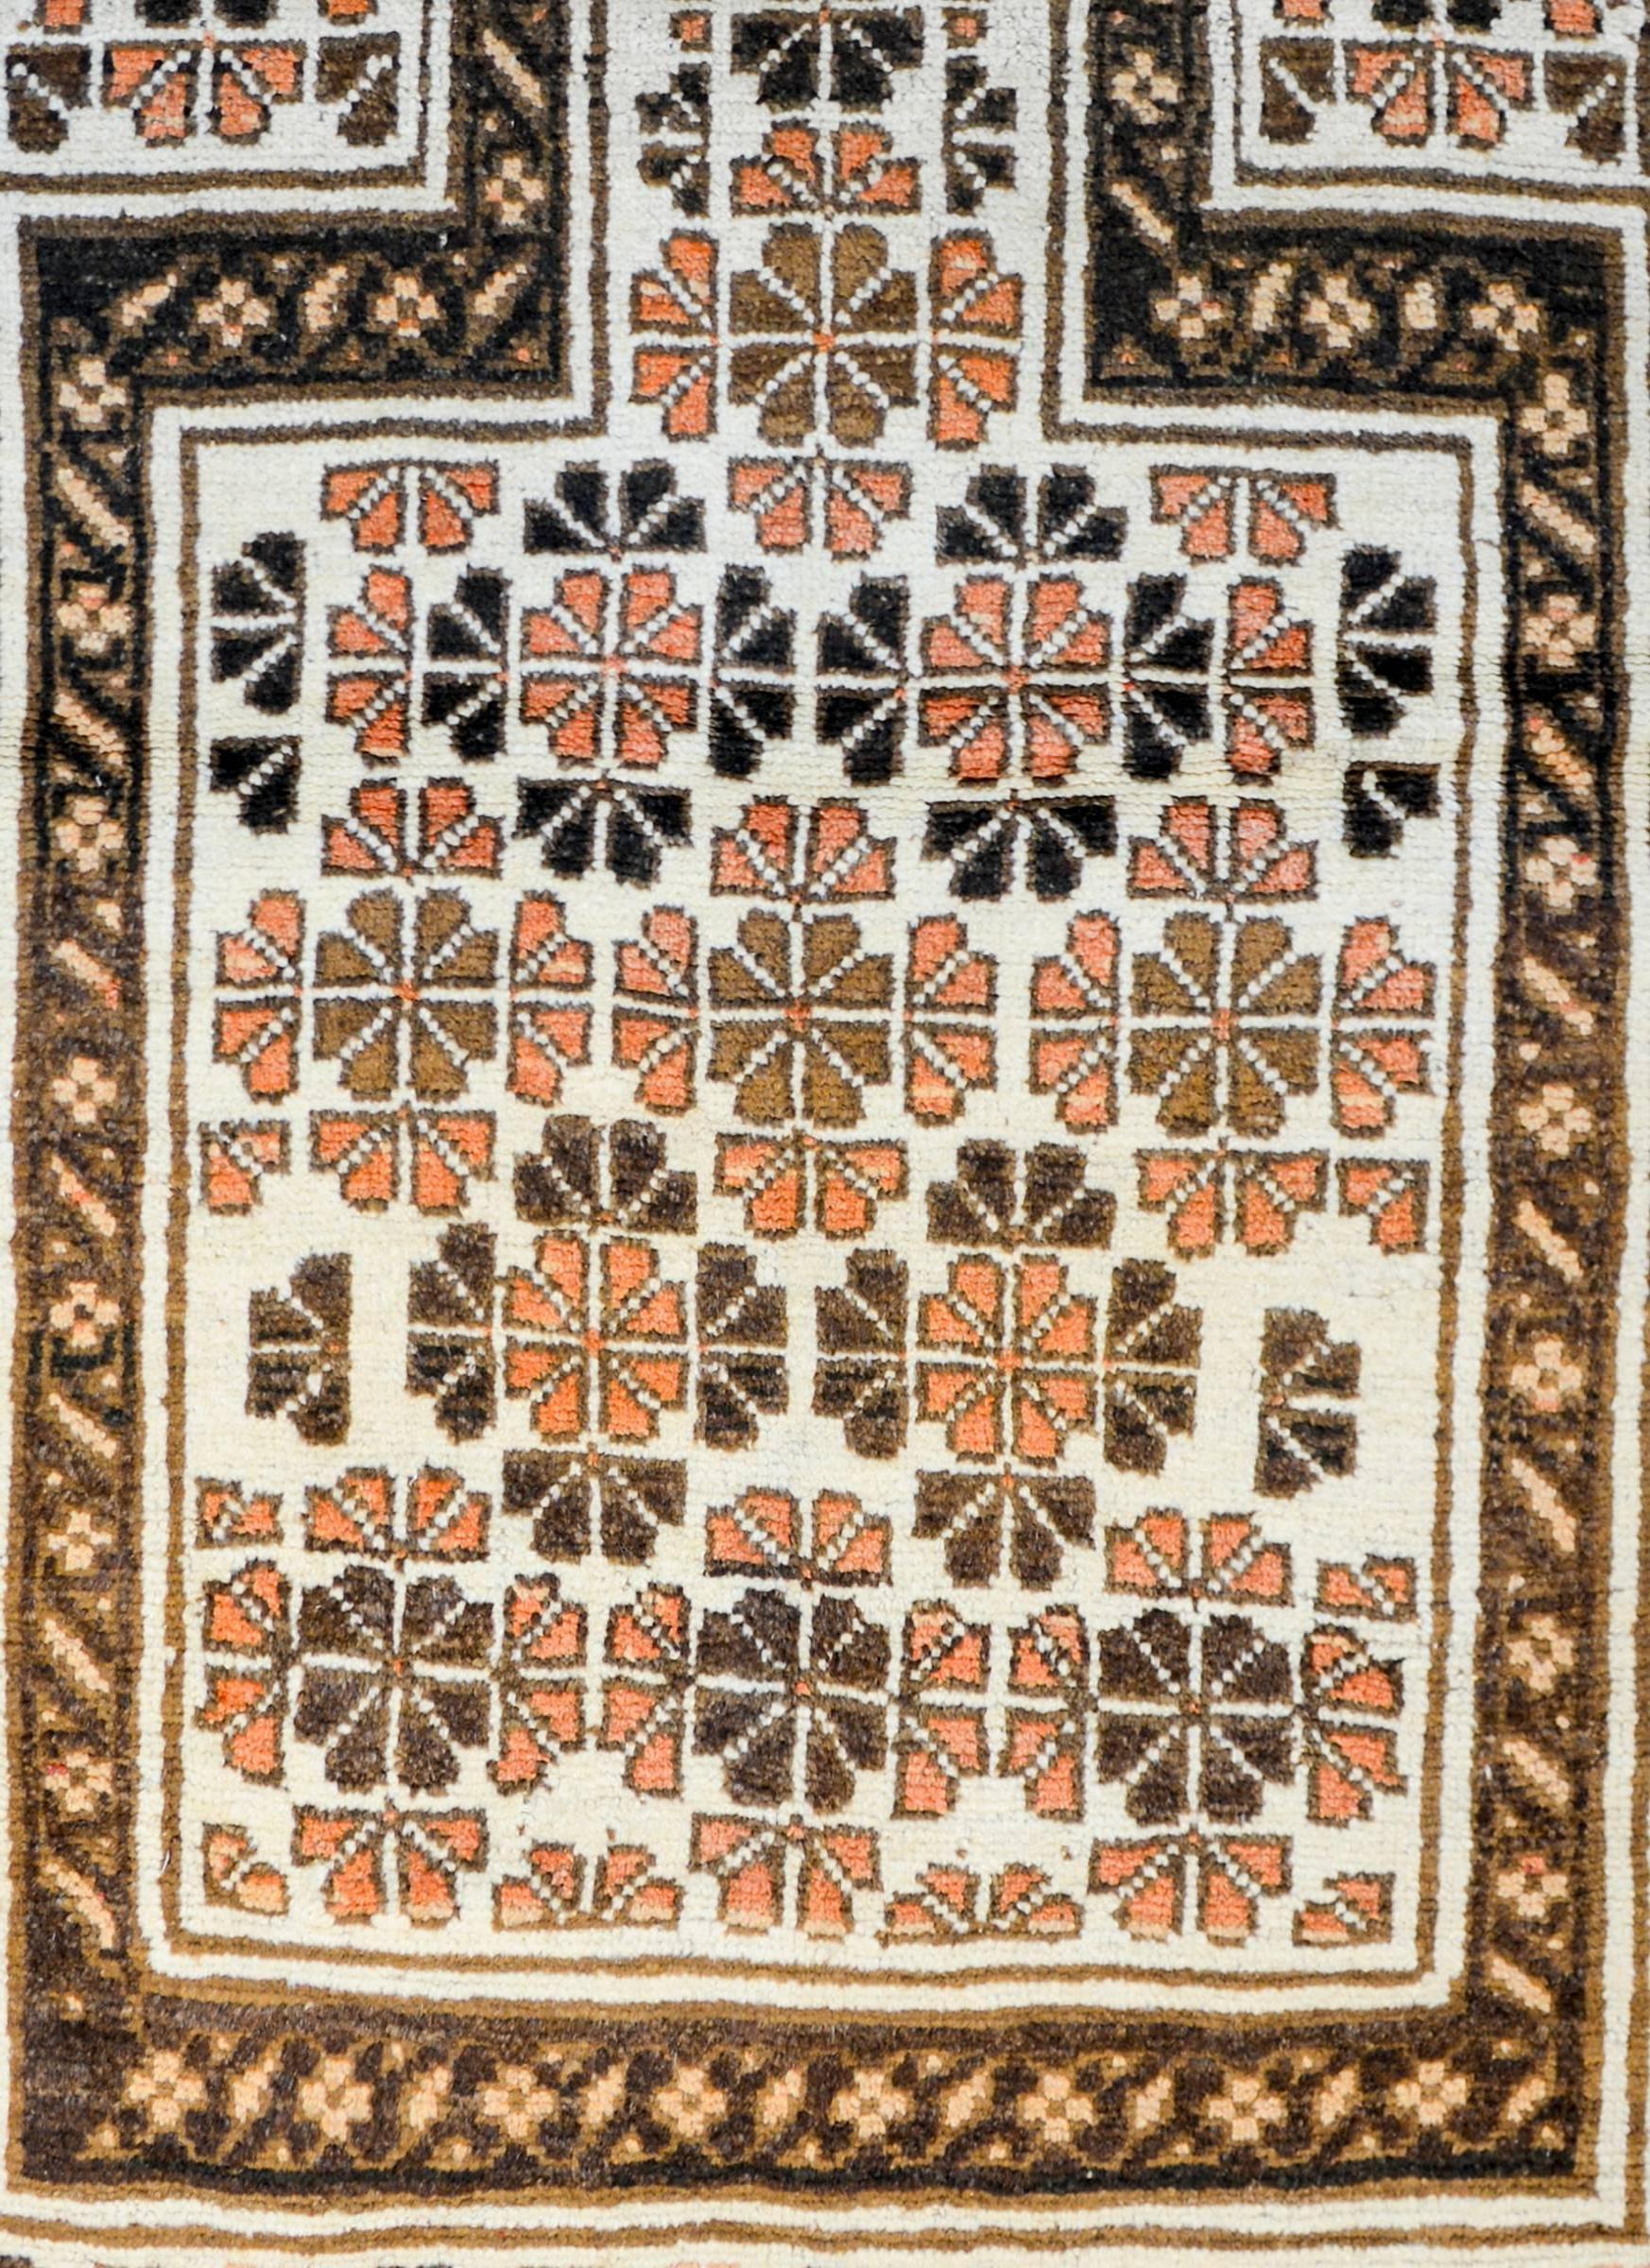 An early 20th century Persian Baluch prayer rug with an all-over floral pattern woven with light, dark, and copper colored brown wool on a cream colored background surrounded by a complementary stylized floral border women in similar colors.
  